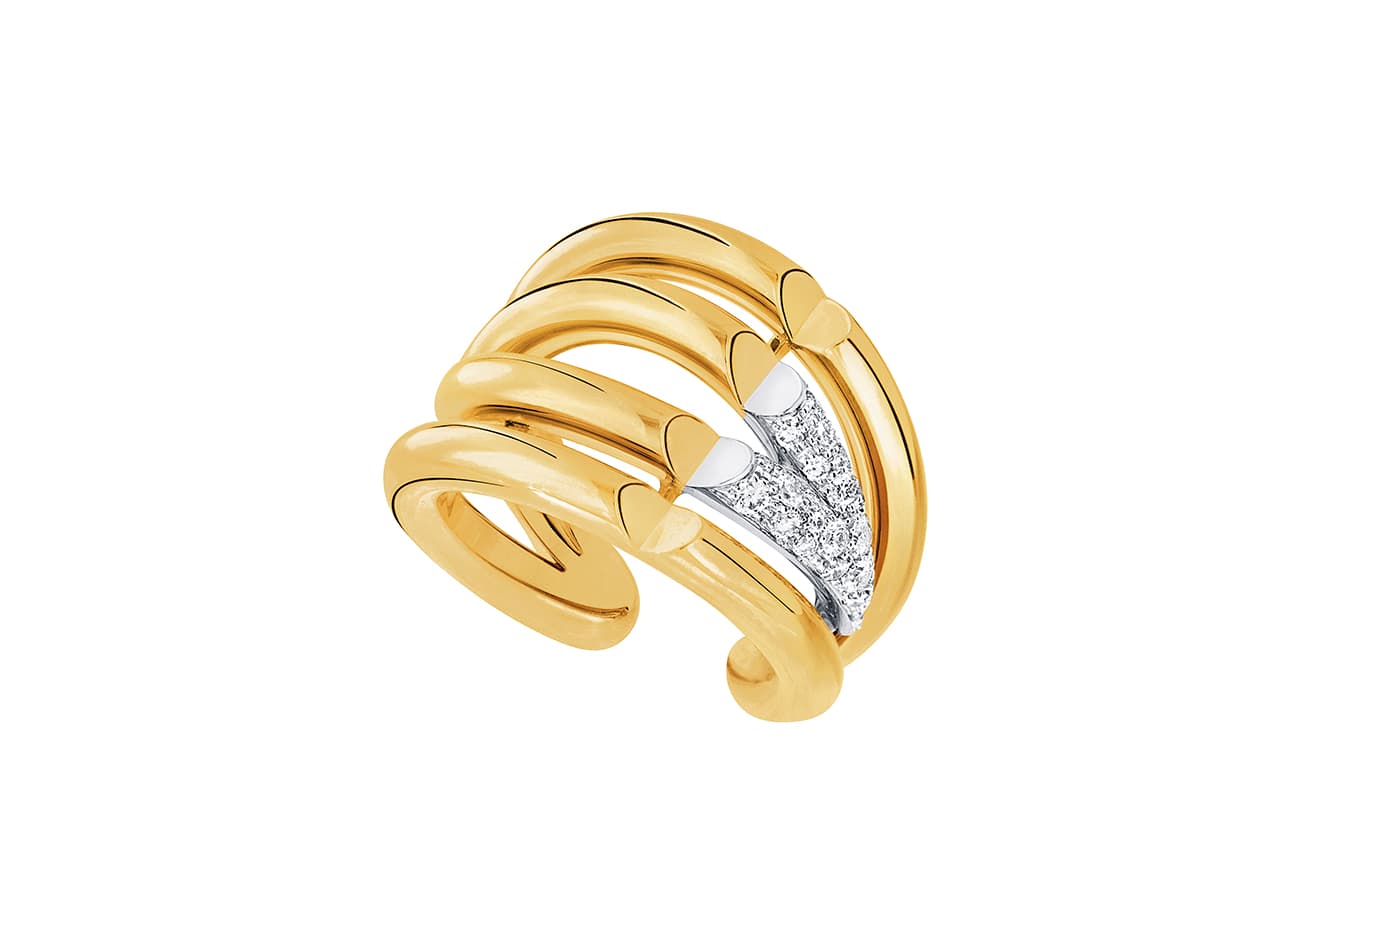 Louis Vuitton LV Volt Upside Down Ring, Yellow and White Gold and Diamonds Gold. Size 47